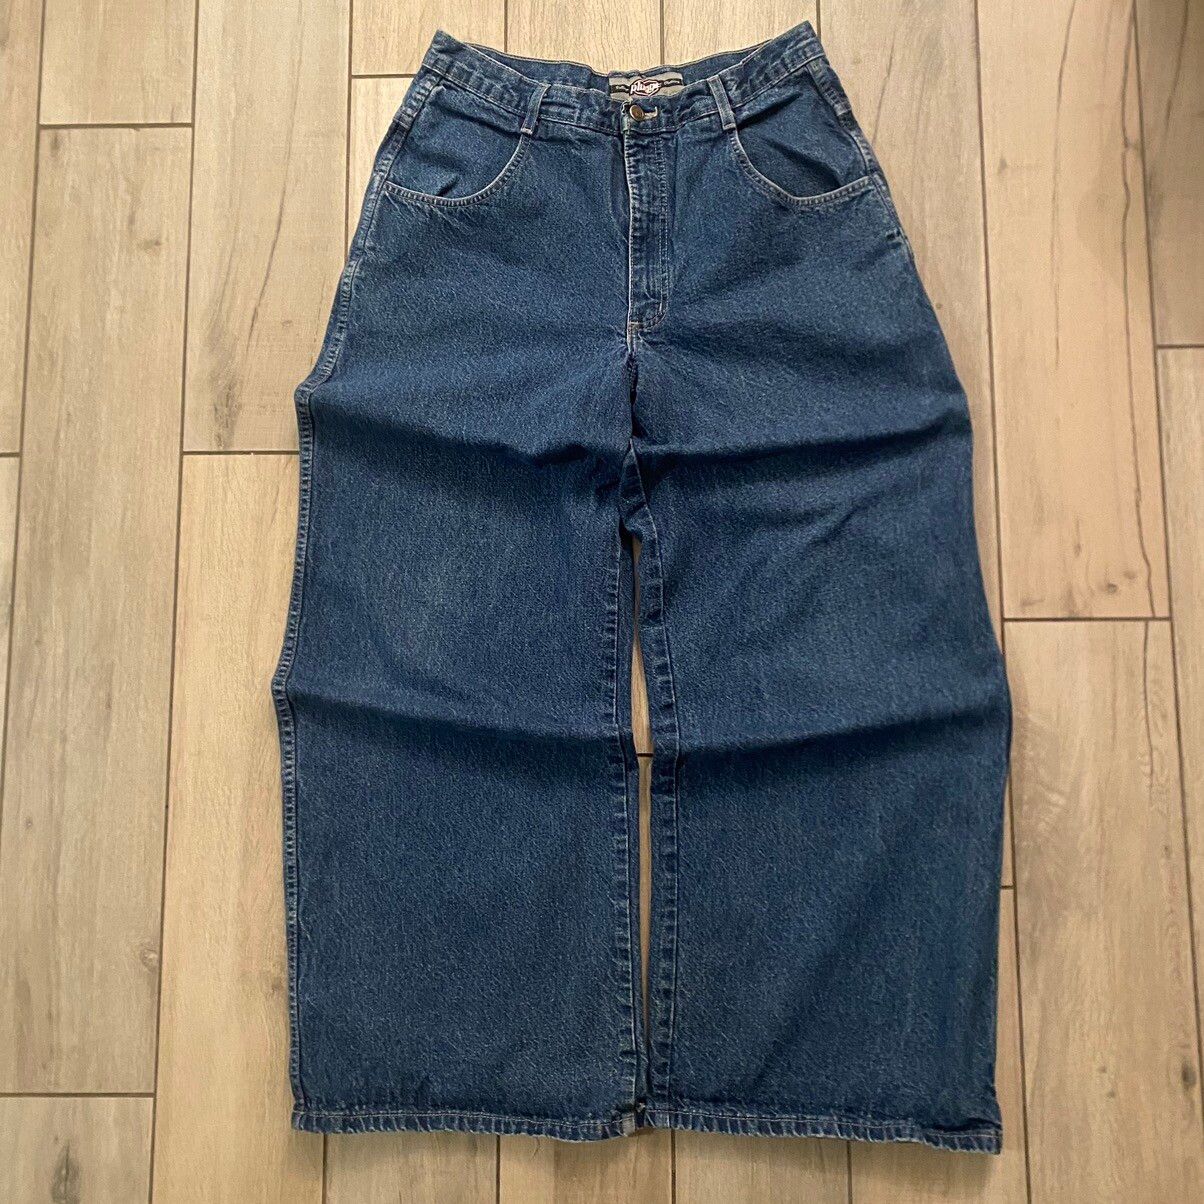 Southpole Vintage 90s Insanely Baggy Jnco Inspired Dark Wash Jeans 32 ...